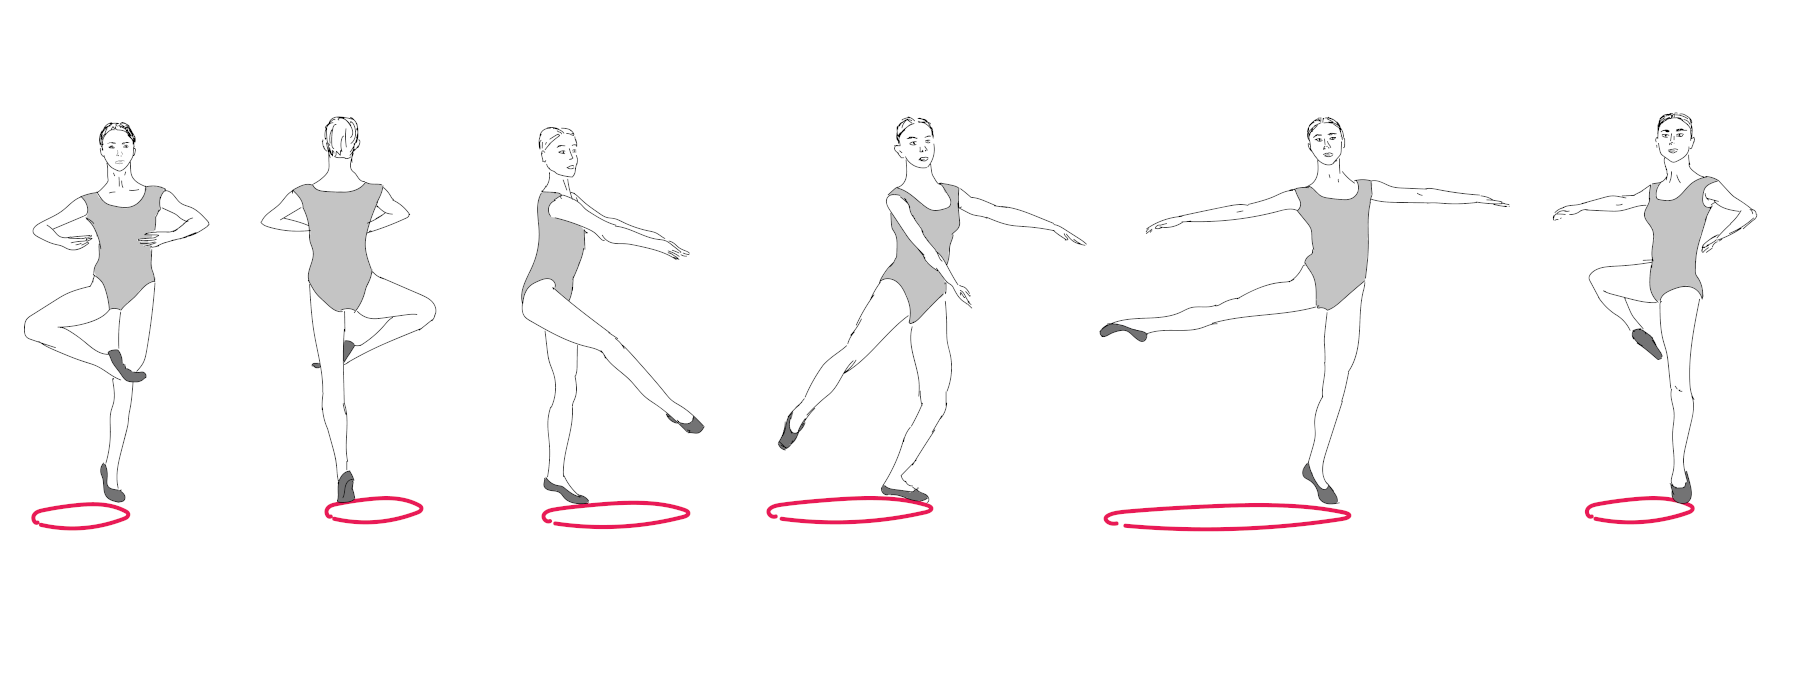 Notice how in tight turns or wide turns, a dancer’s feet create different size circles on the floor. image credit Mariya Krastanova